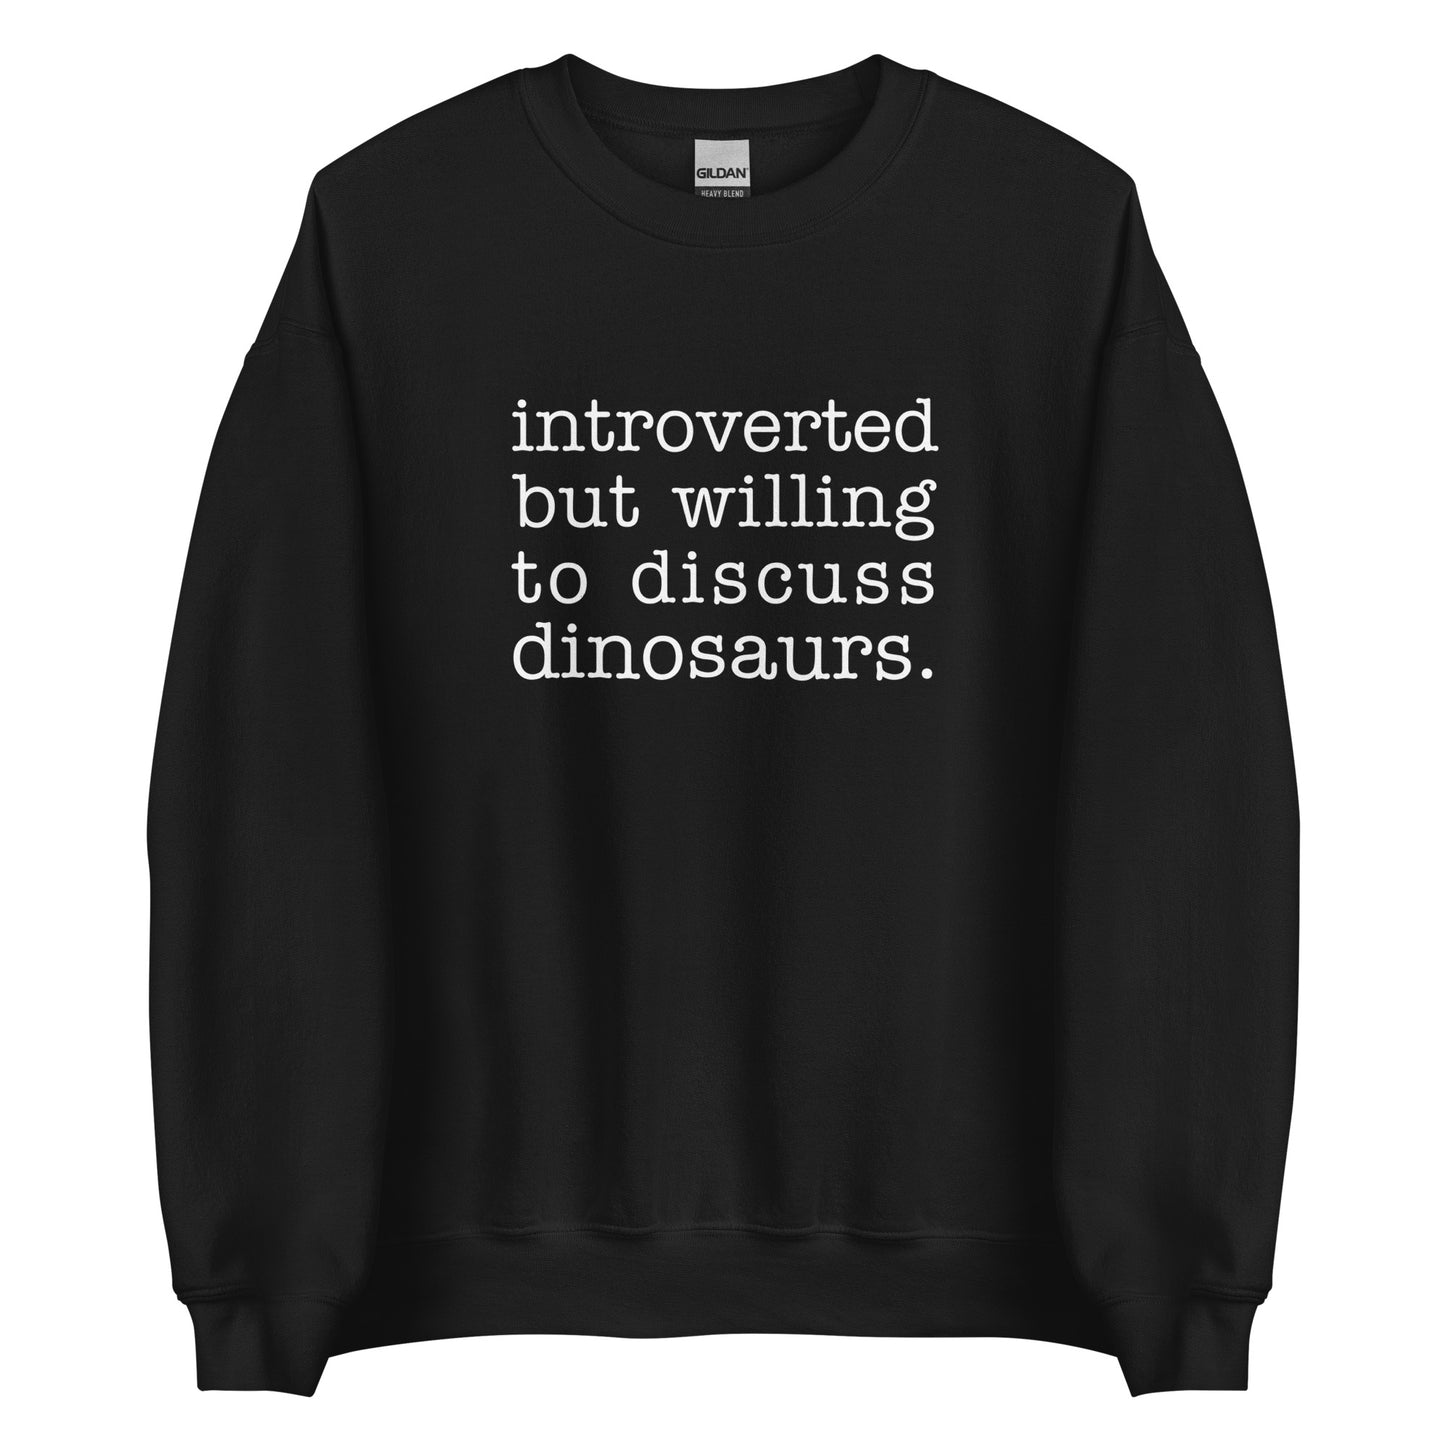 A black crewneck sweatshirt with white text reading "introverted but willing to discuss dinosaurs"